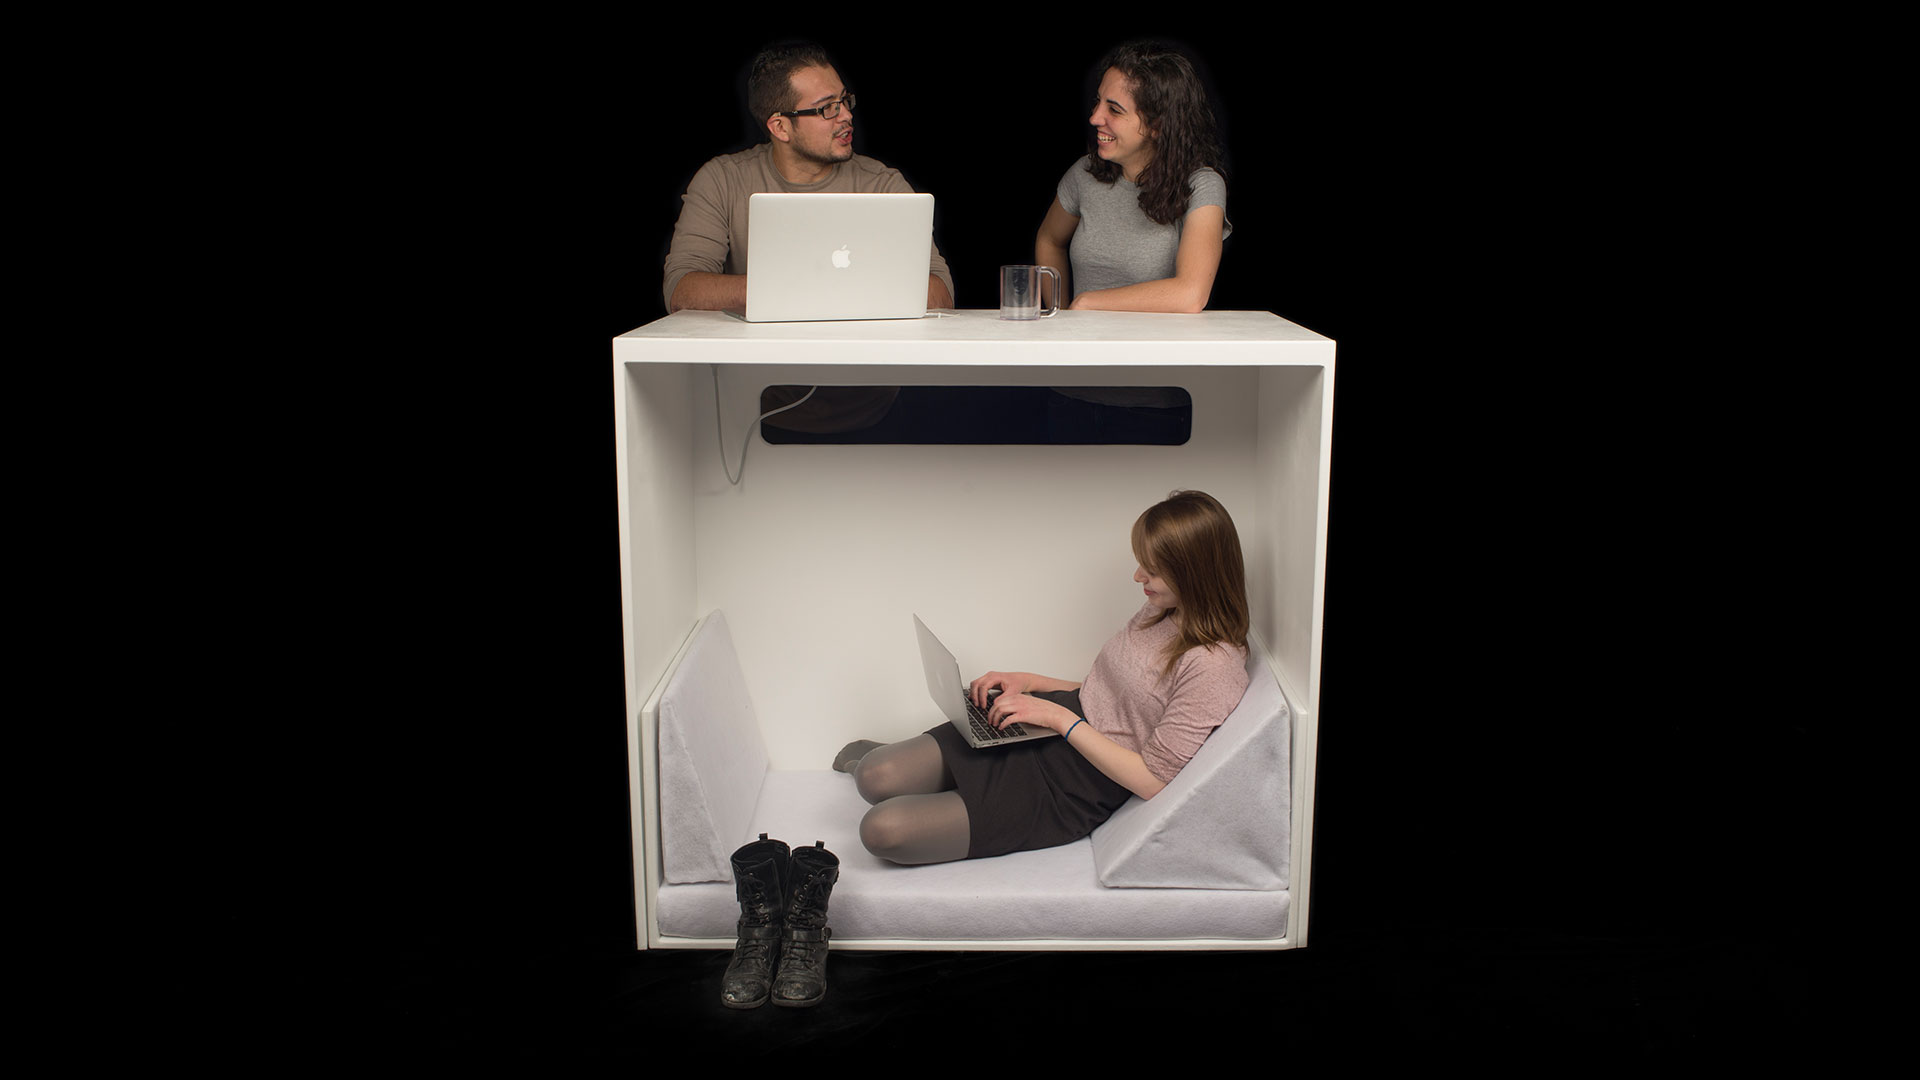 Woman inside desk space of Personal Space Bar with bench component inverted for a lounging area, woman works with laptop inside while above at desk space on top of compartment two students stand talking to each other with a laptop out 